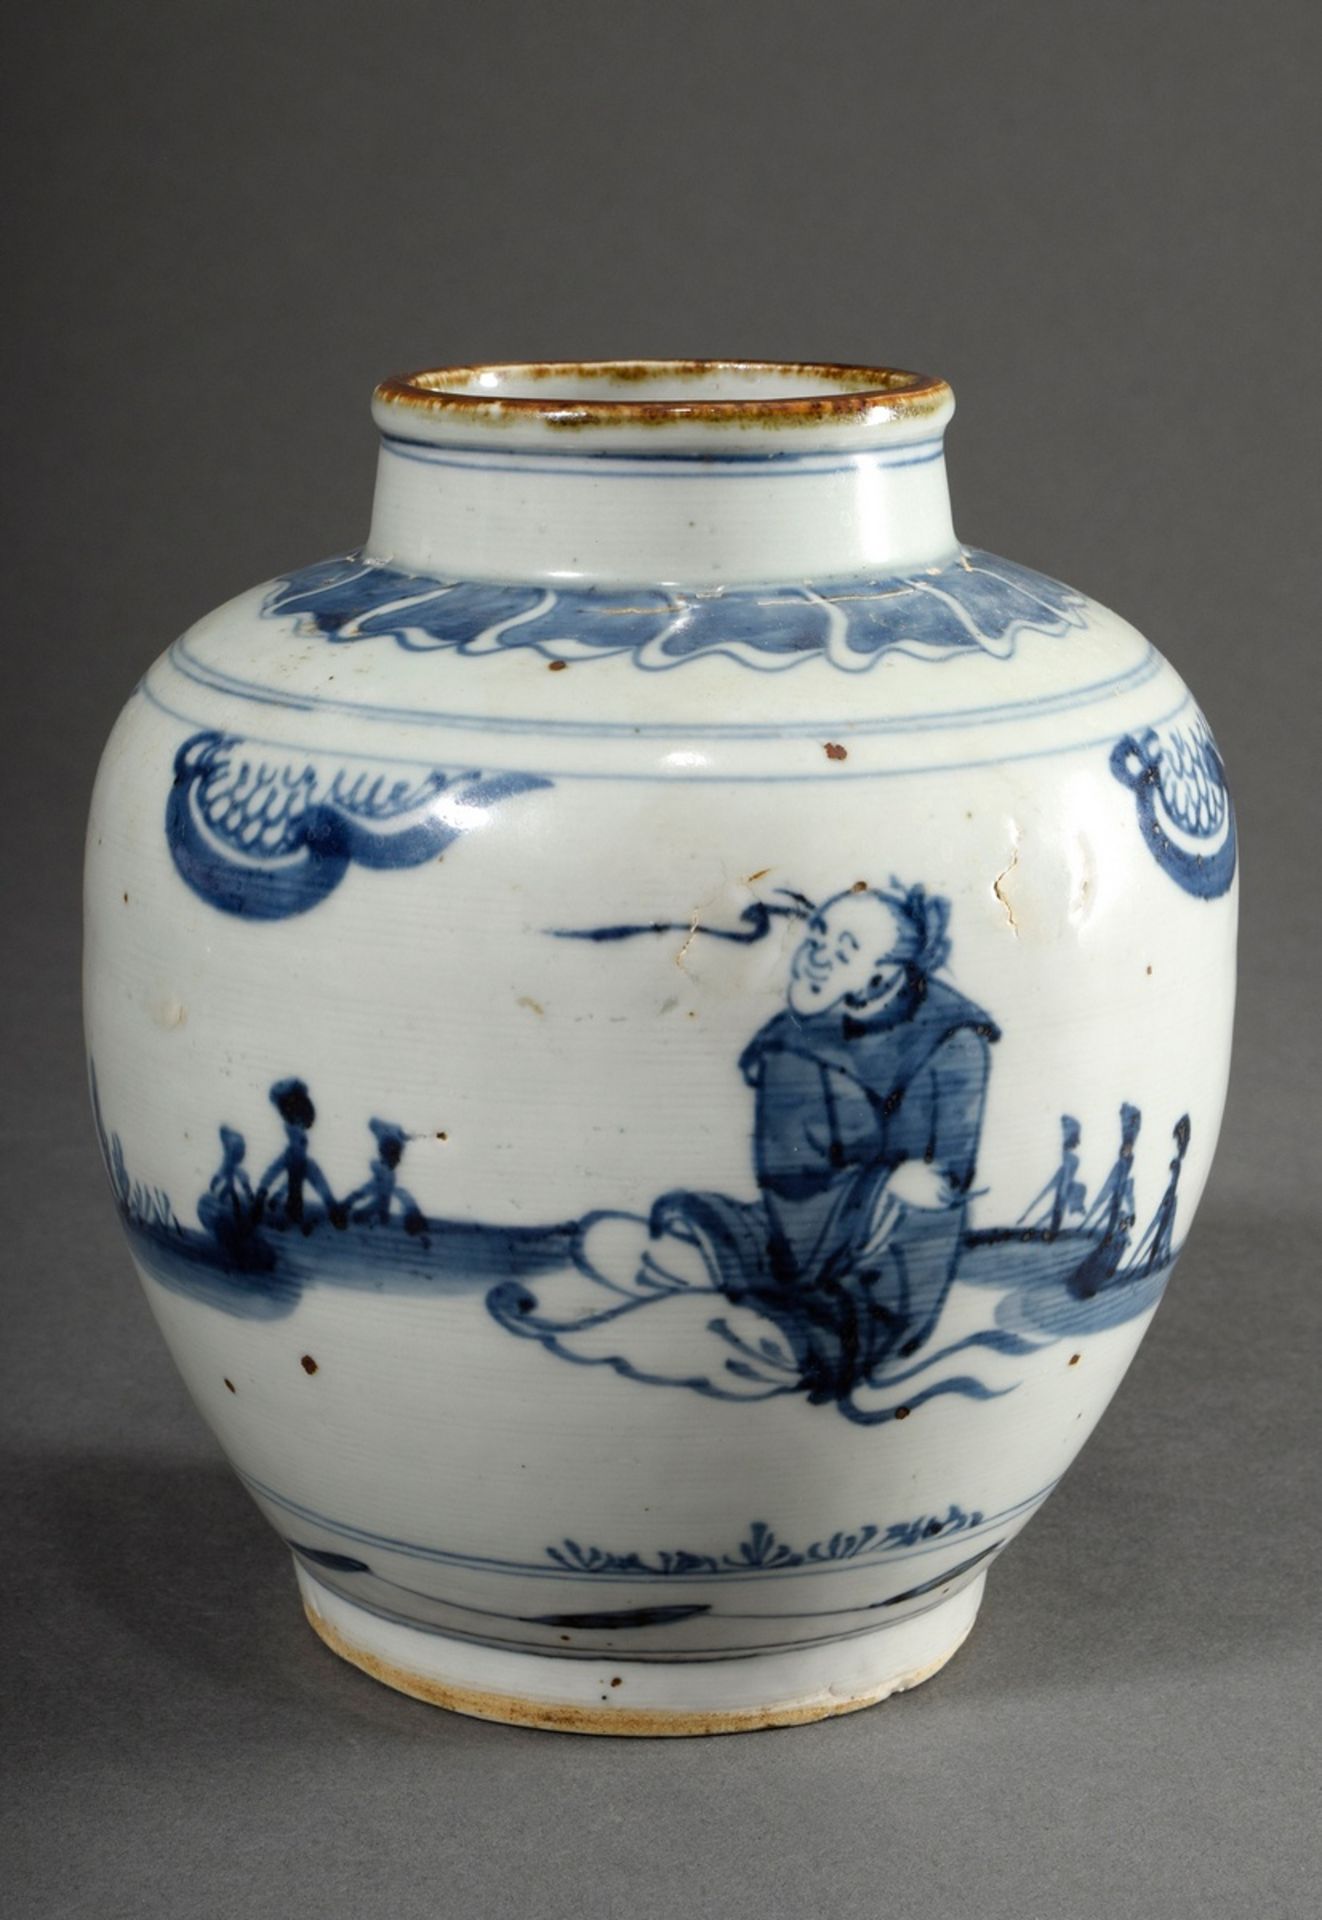 Small Chinese porcelain ginger pot with blue painting decor "Historical figures in landscape", at t